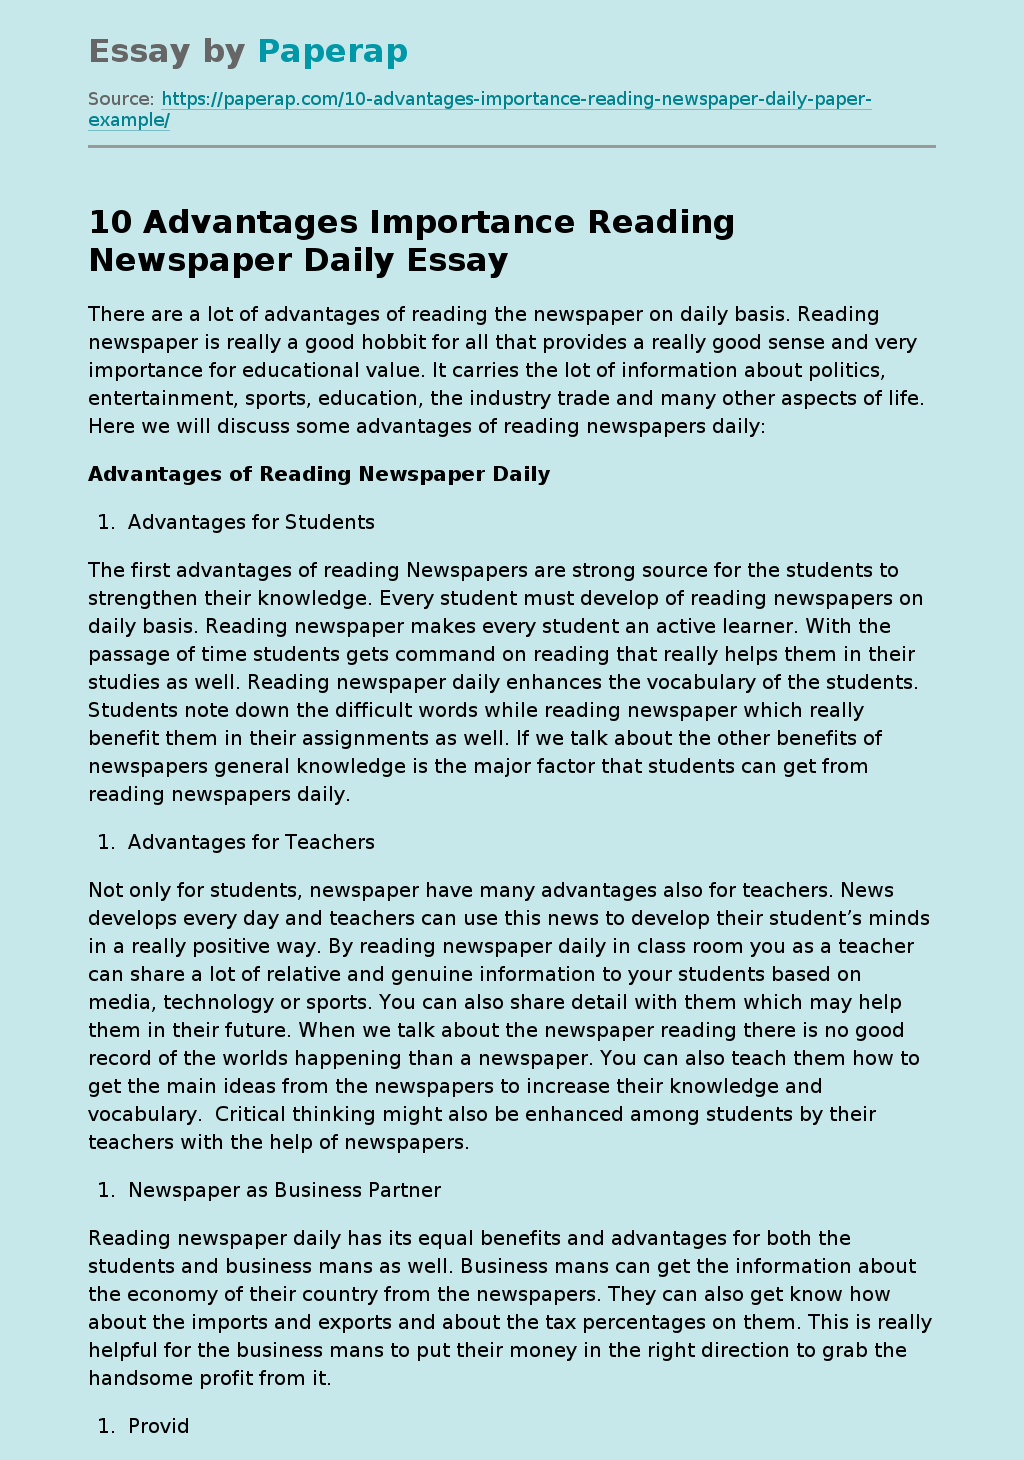 10 Advantages Importance Reading Newspaper Daily